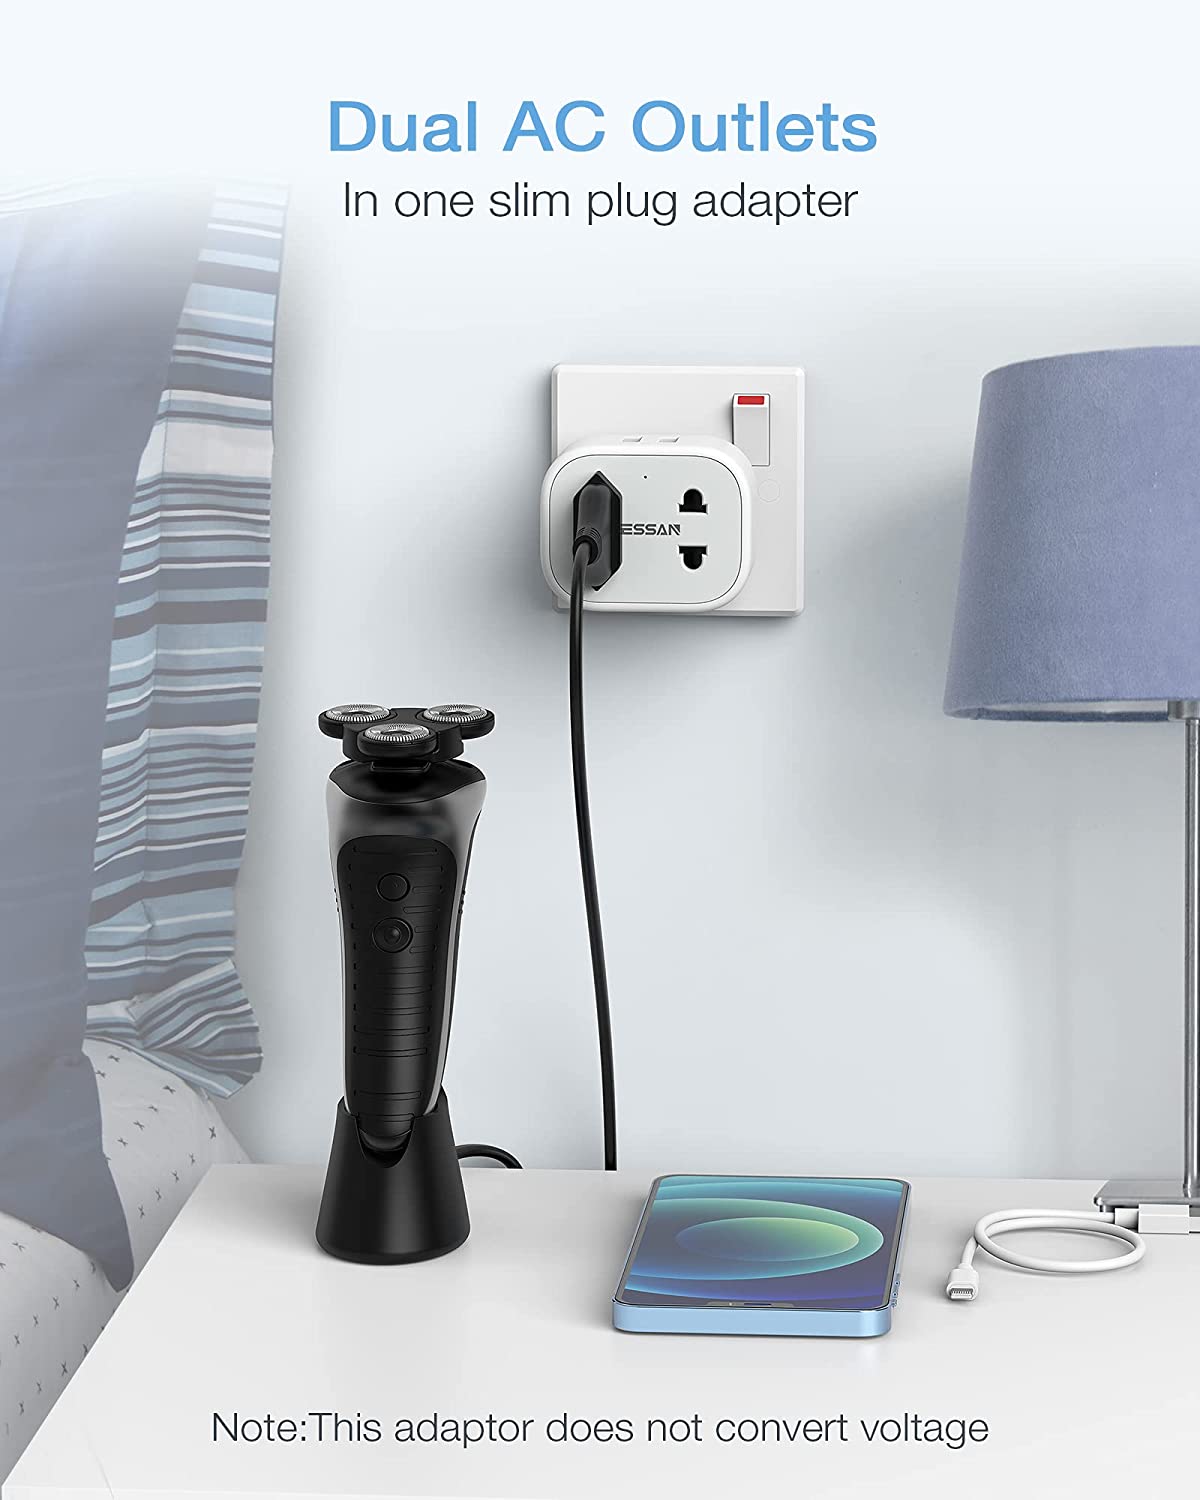 Shaver Charger 2 Pin to 3 Pin Adapter Plug Socket for Bathroom Electric Razor